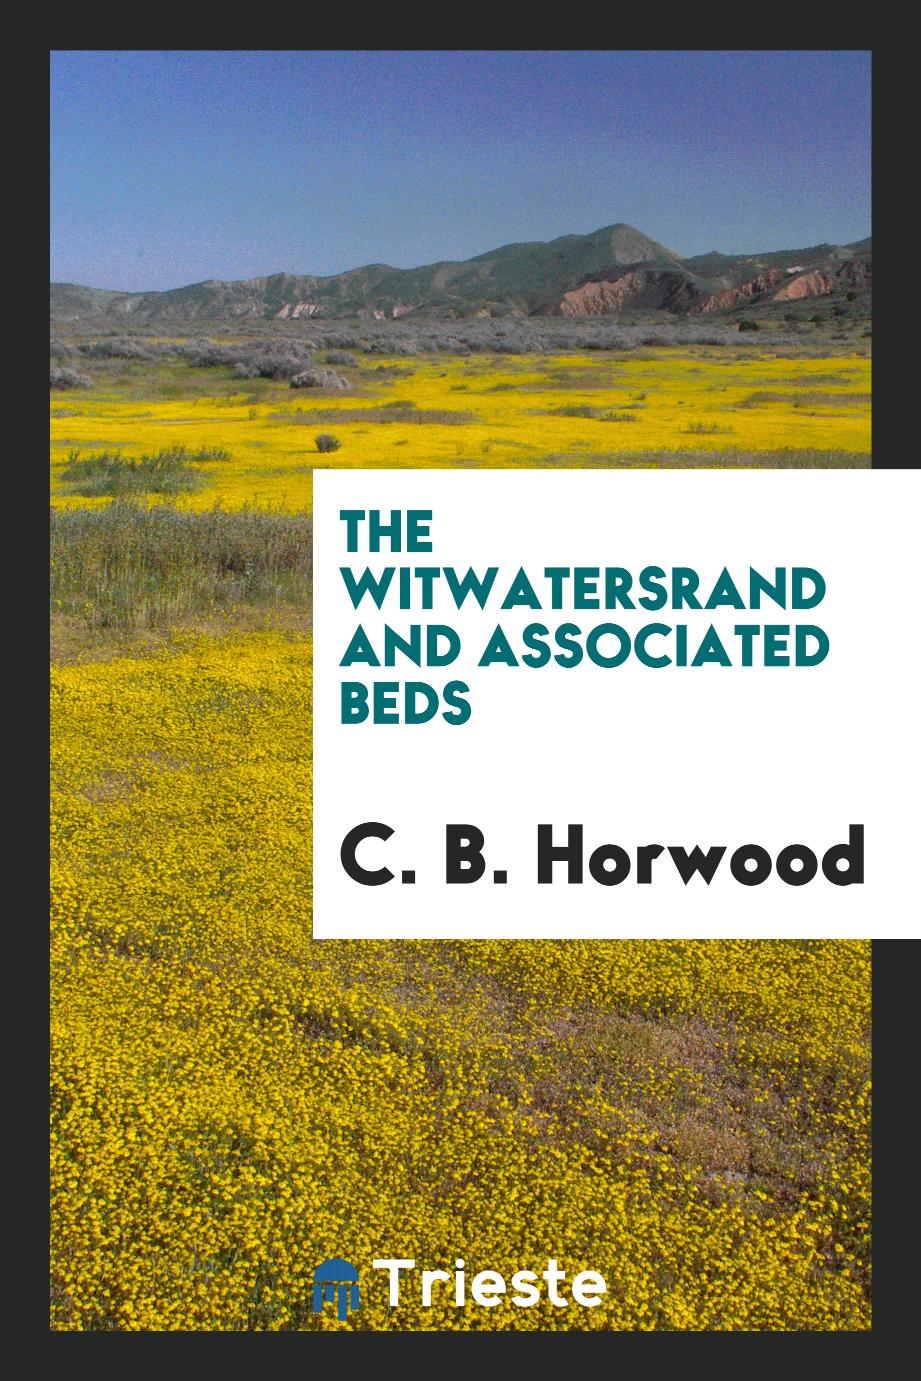 The Witwatersrand and Associated Beds